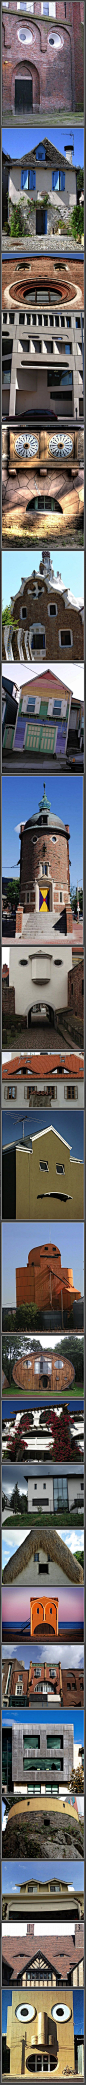 Great #architecture with unintentionally #FunnyFaces. #Play!: 